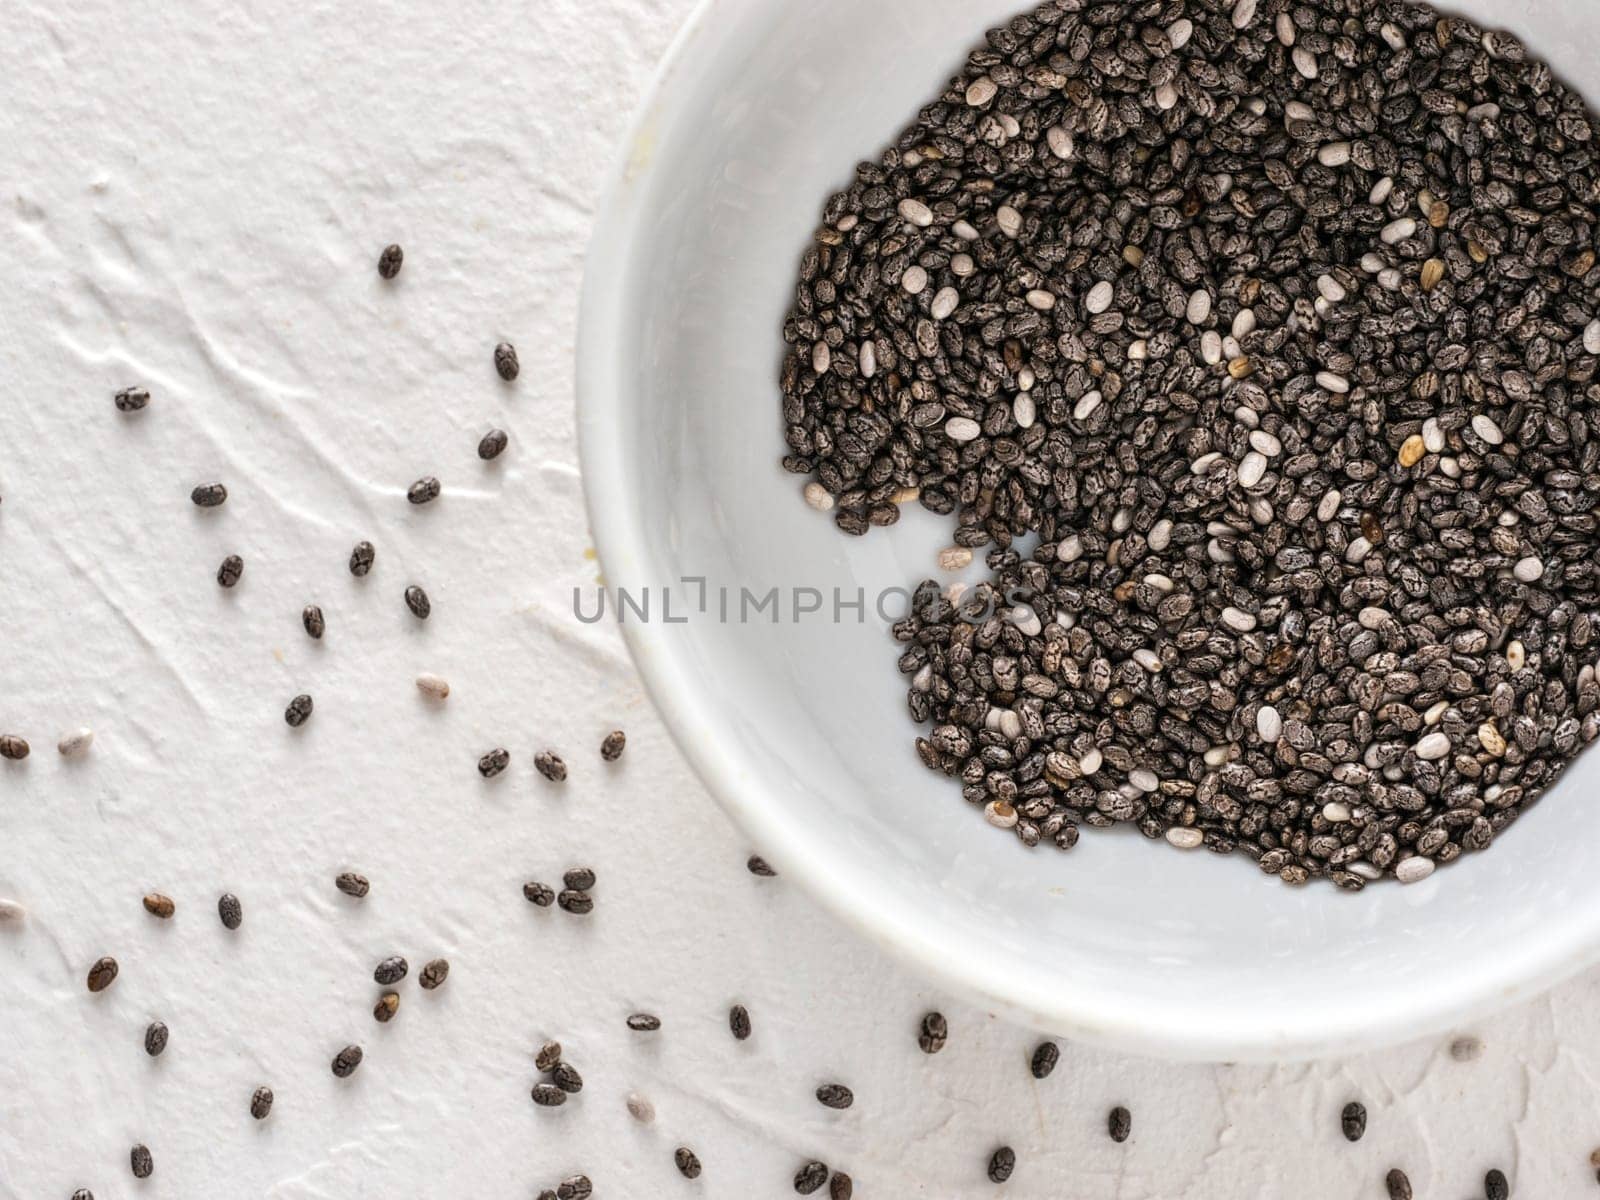 Chia seeds with copy space. Chia seed on white concrete textured background. Top view or flat lay. Copy space. Healthy food and diet concept